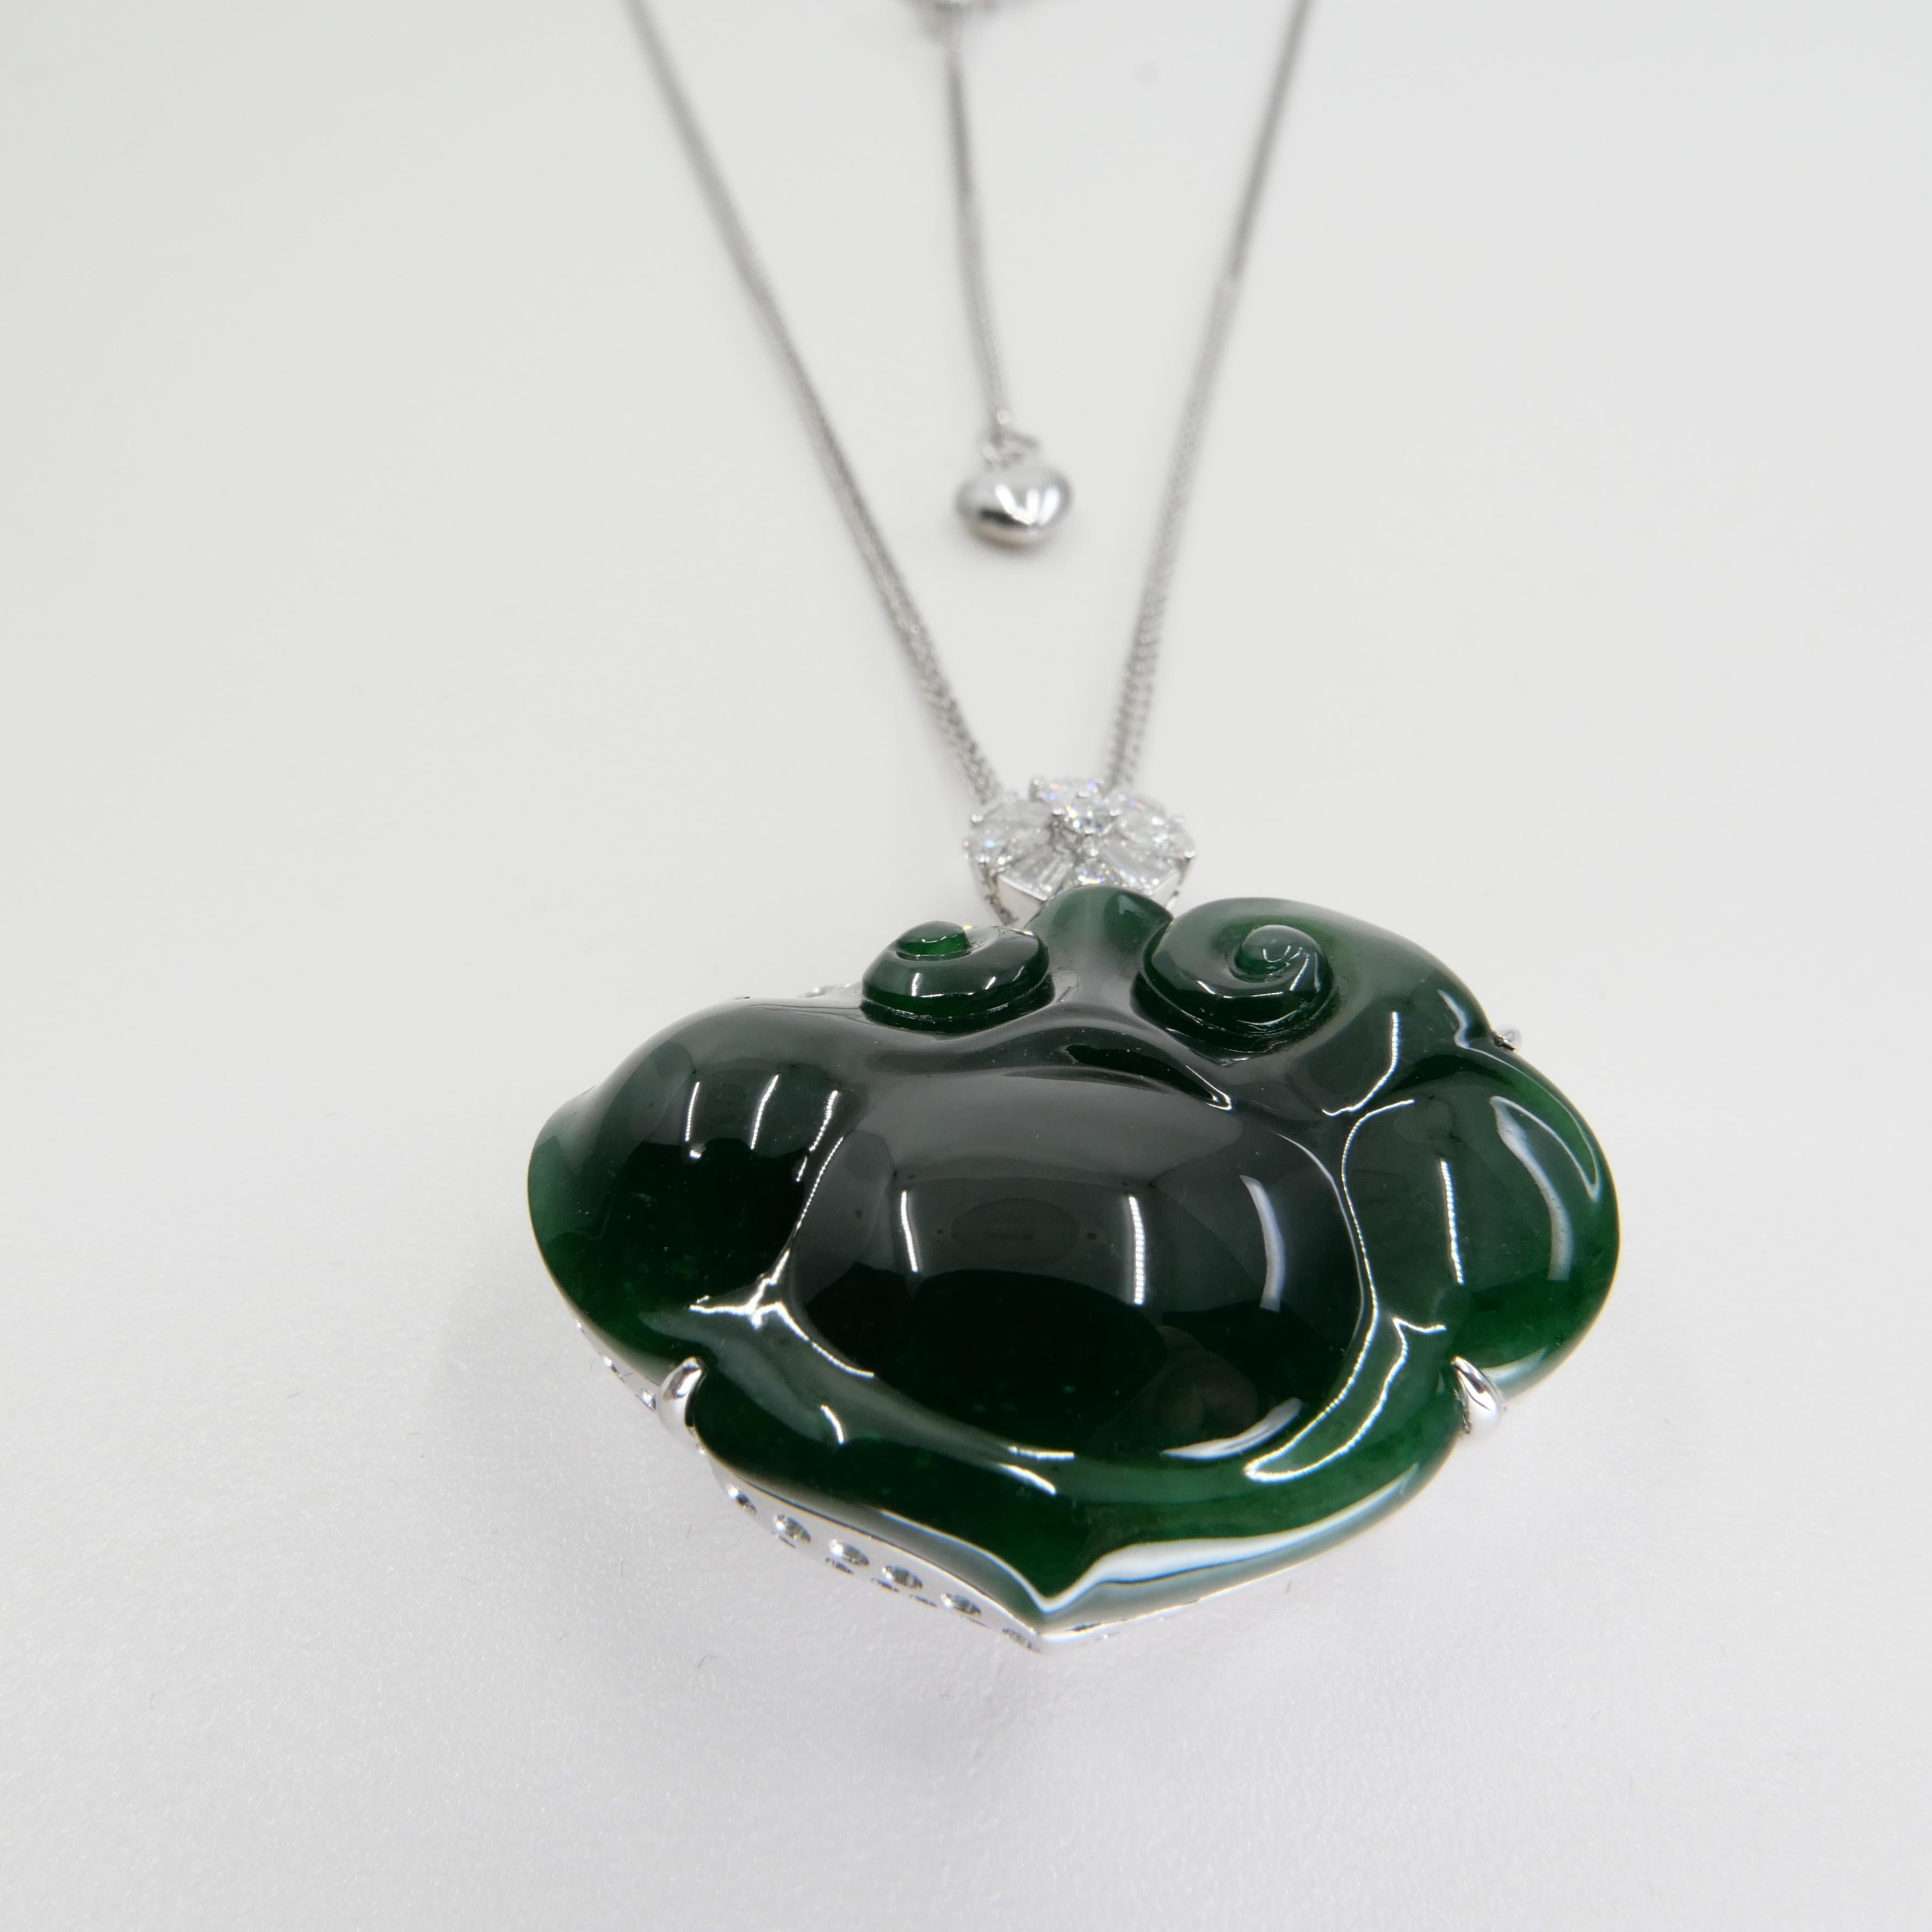 Women's Certified Natural Carved Ruyi Jade & Diamond Pendant  Necklace. Intense Green. For Sale